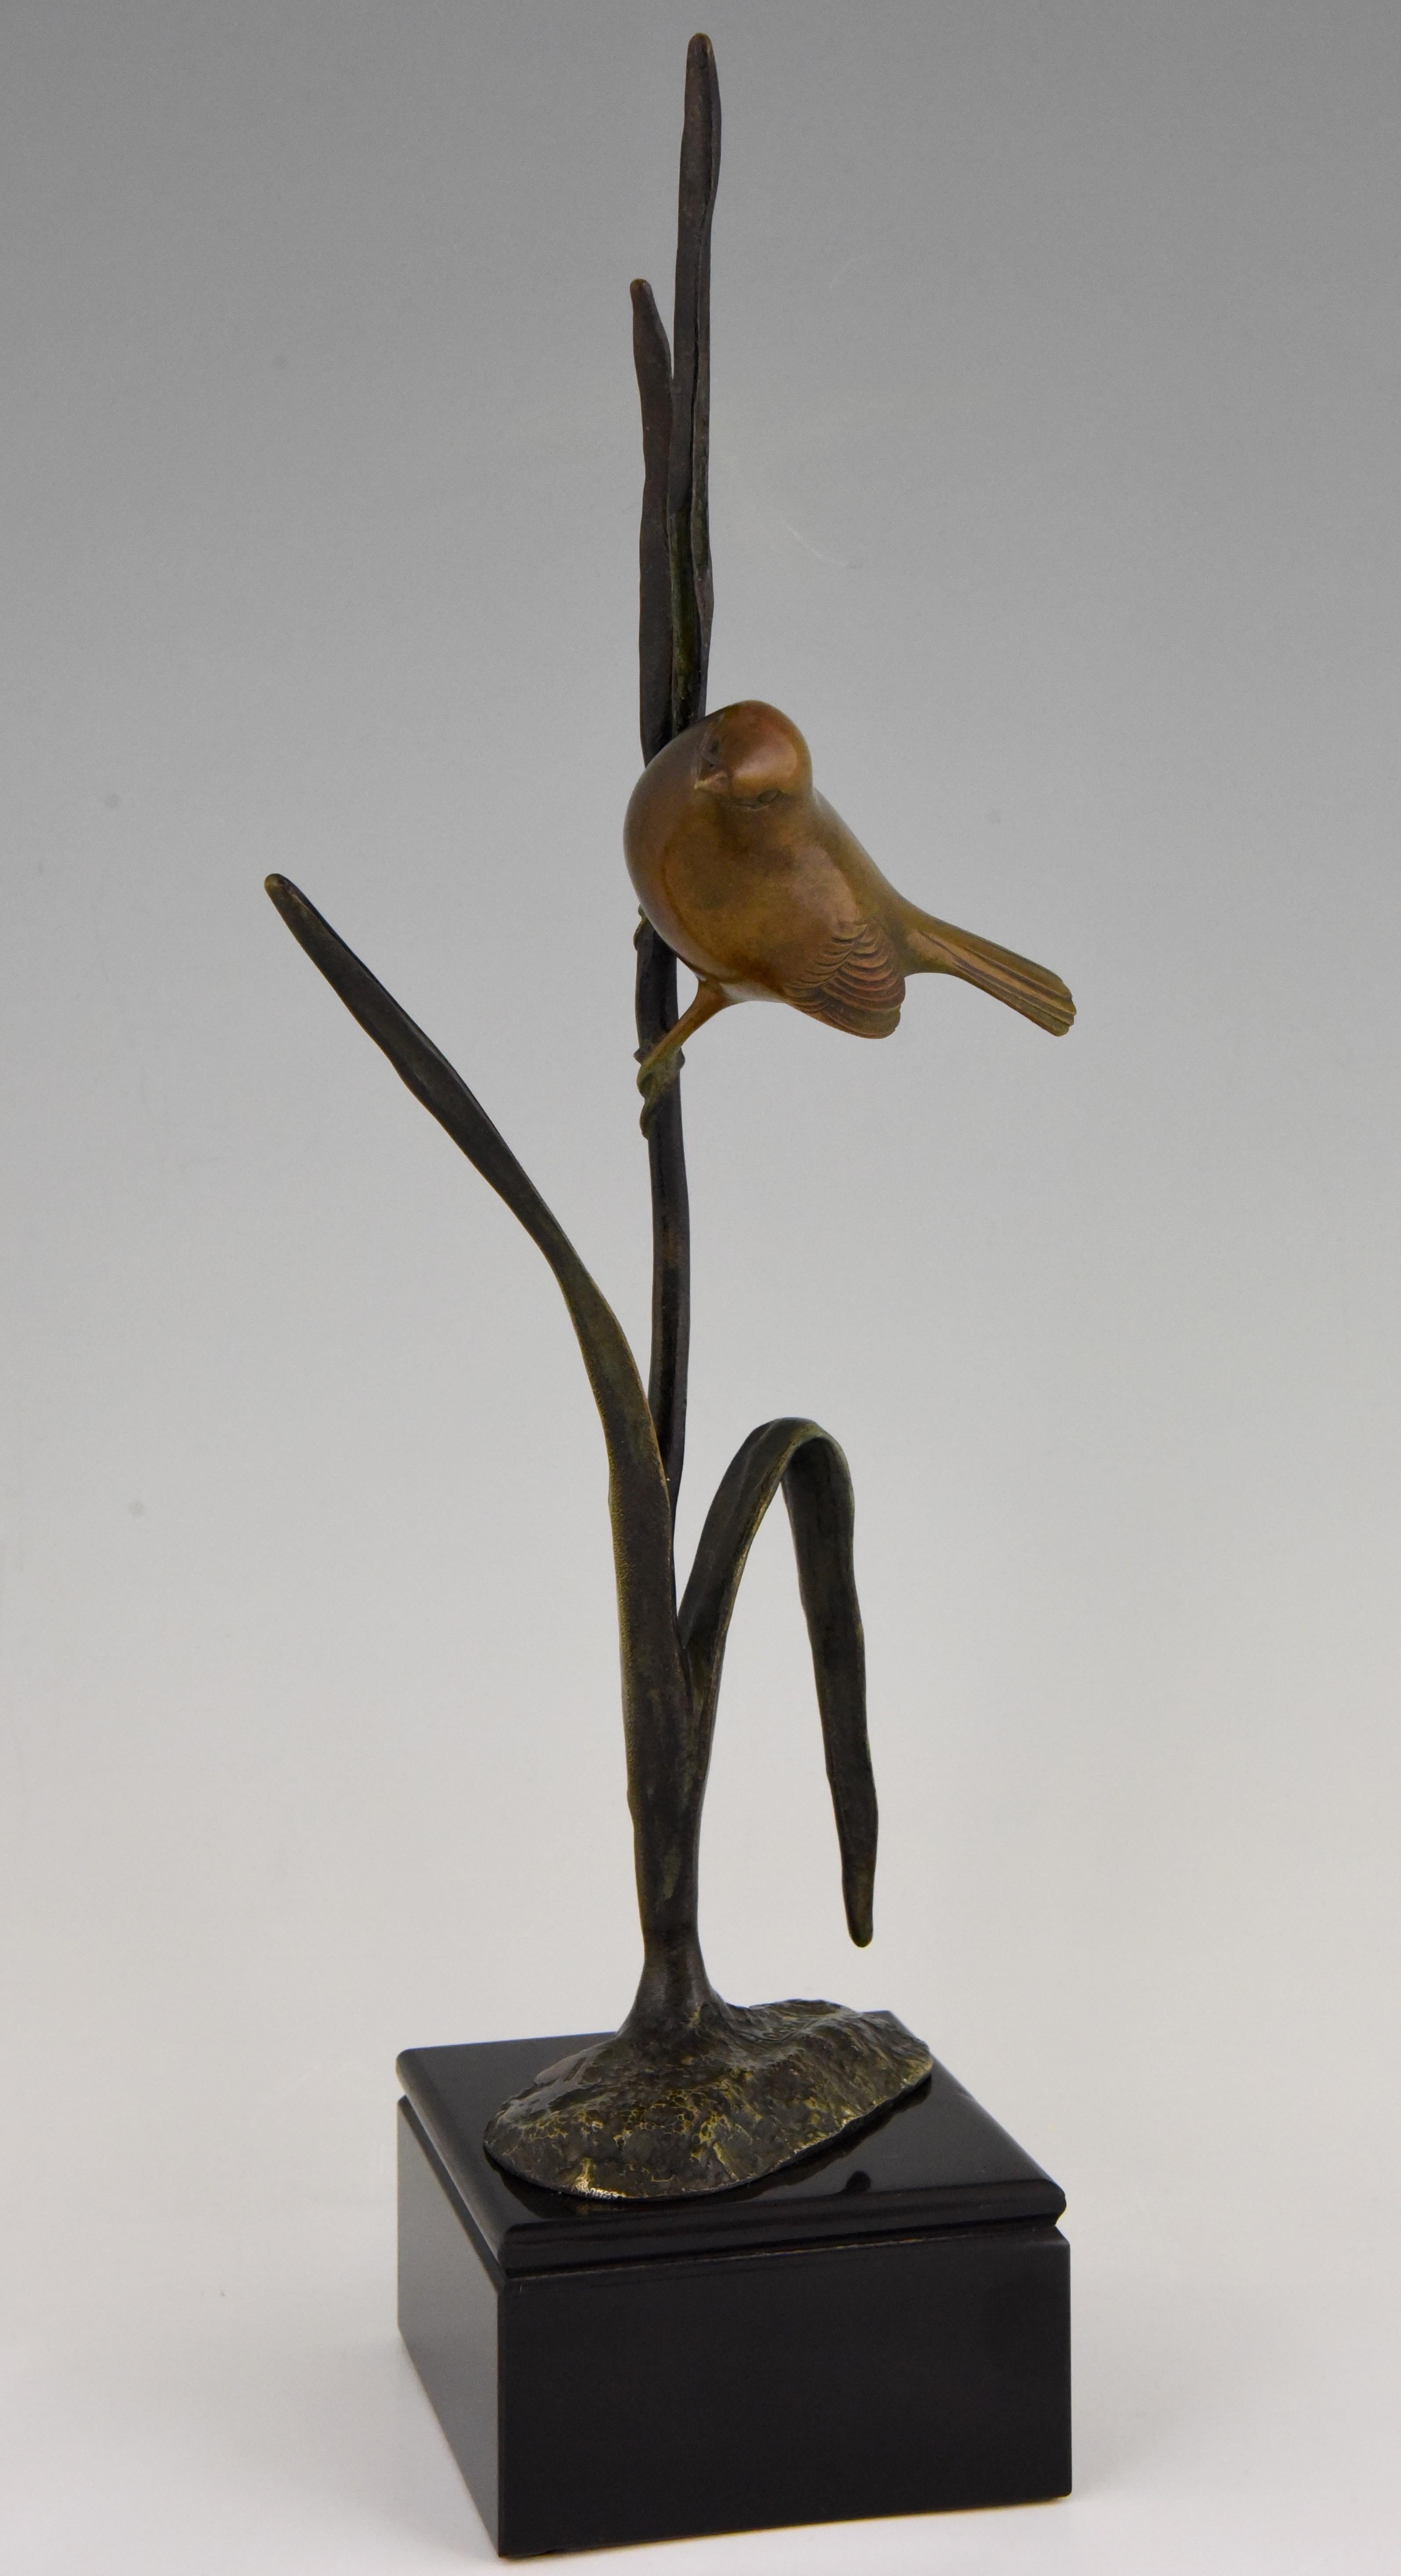 Cute Art Deco bronze sculpture of a bird sitting on a branch. 
The bronze has a multicolor patina and is mounted on a Belgian Black marble base. Signed by the French artist Irenee Rochard, 1930.